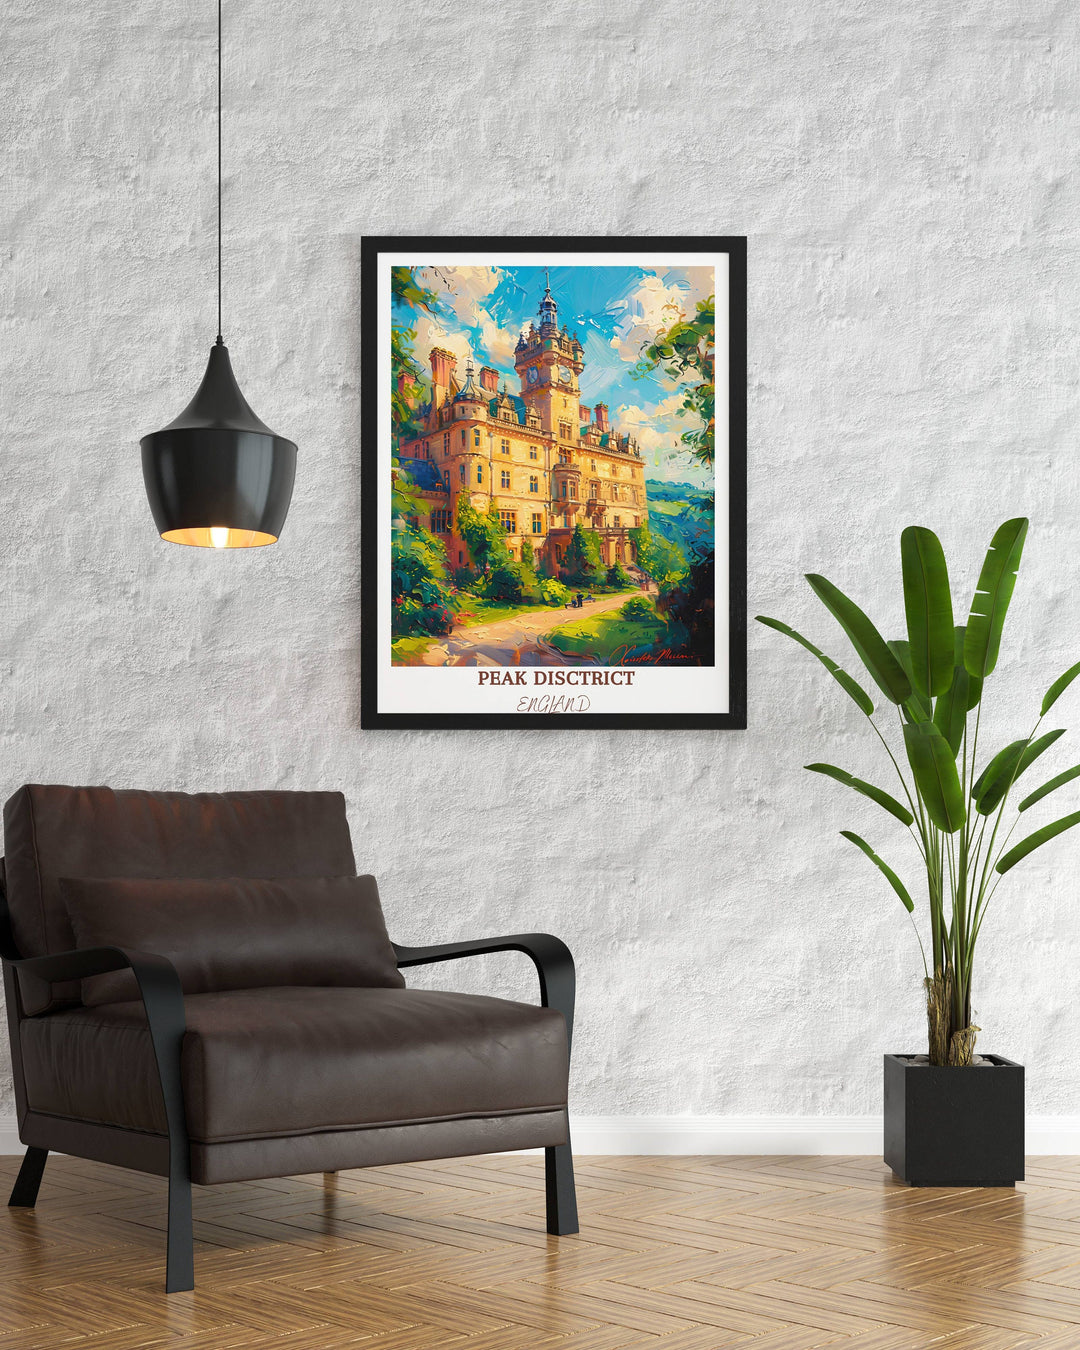 Elevate your decor with the timeless beauty of the Peak District and the iconic silhouette of Chatsworth House in this captivating print.